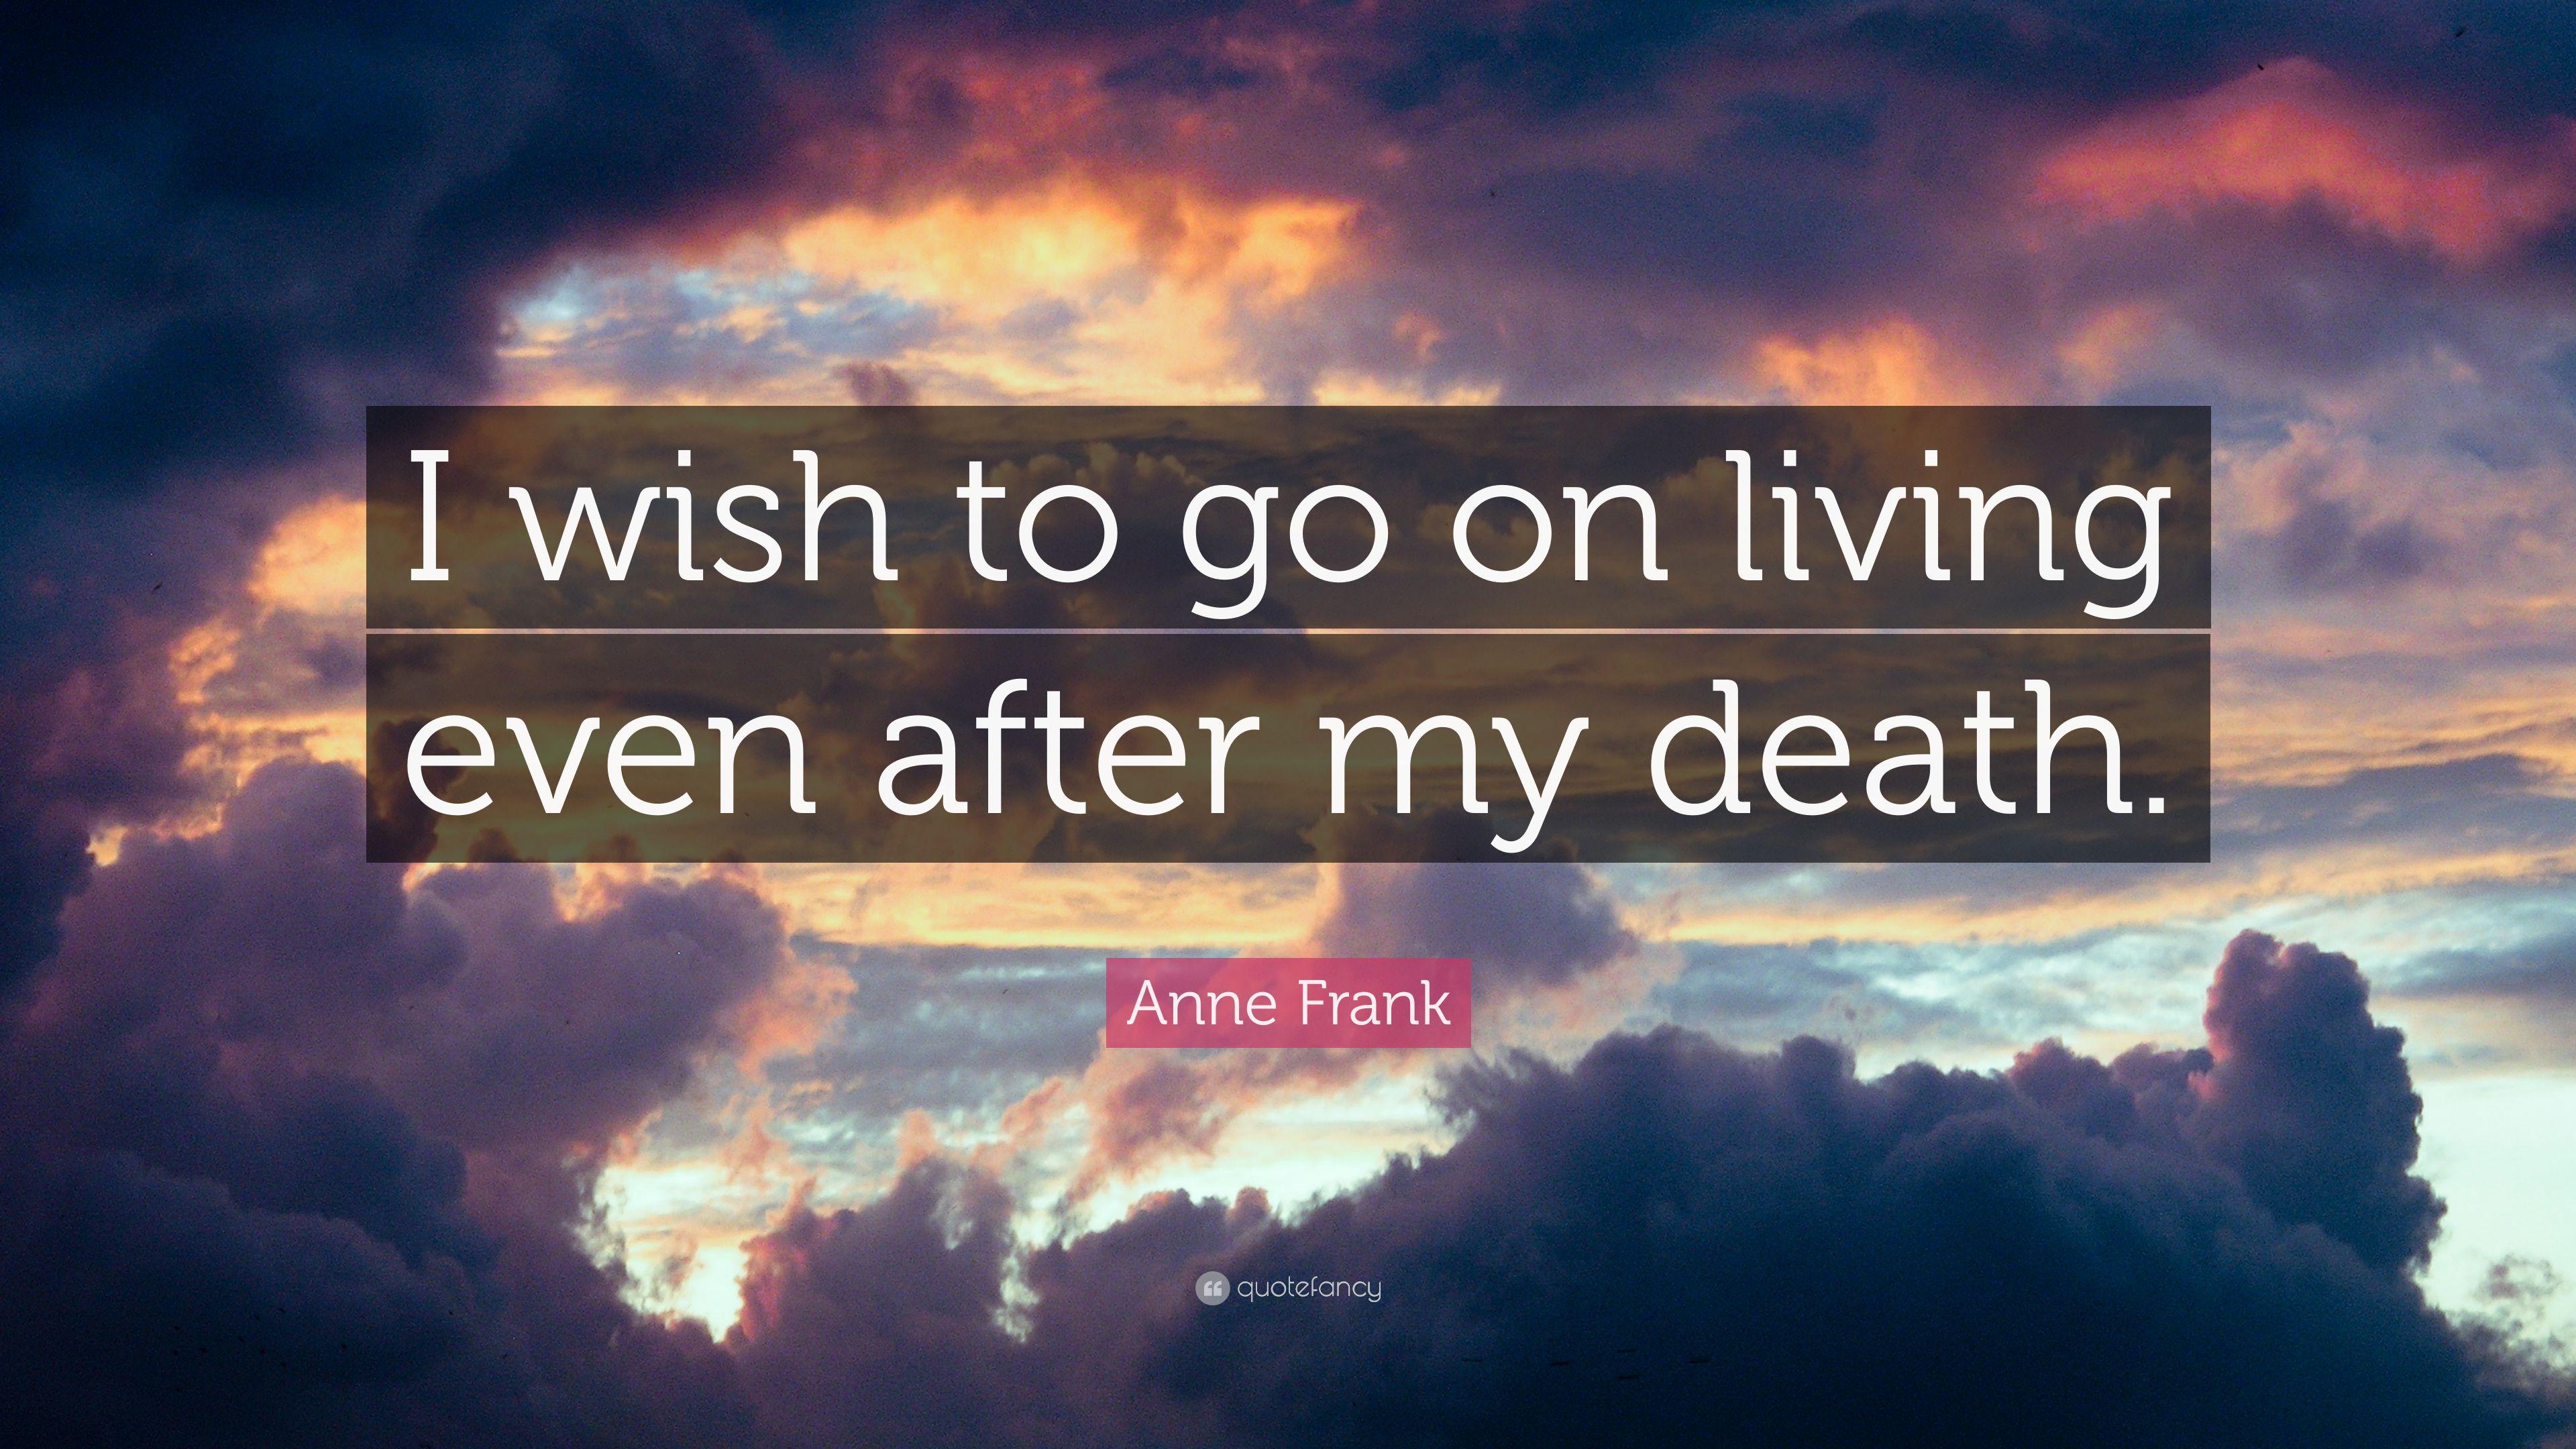 Anne Frank Quote: “I wish to go on living even after my death.” 10